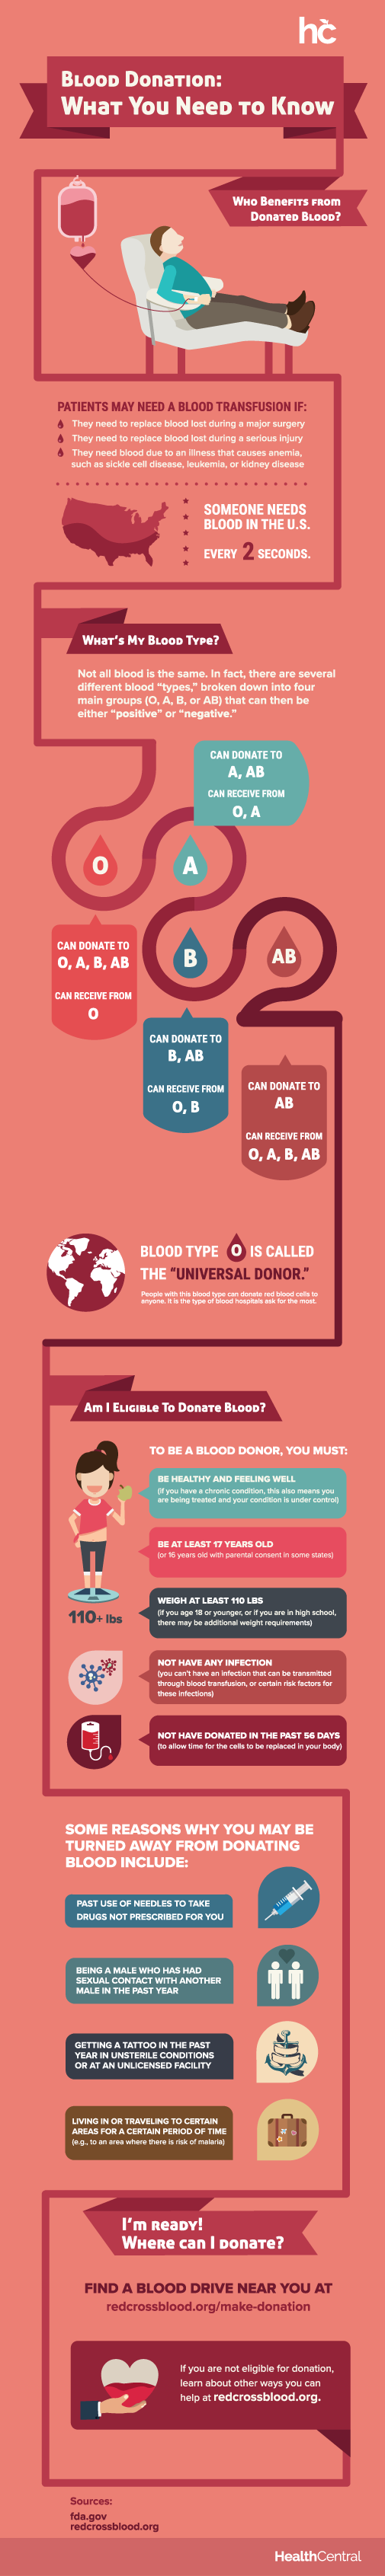 infographic blood donation